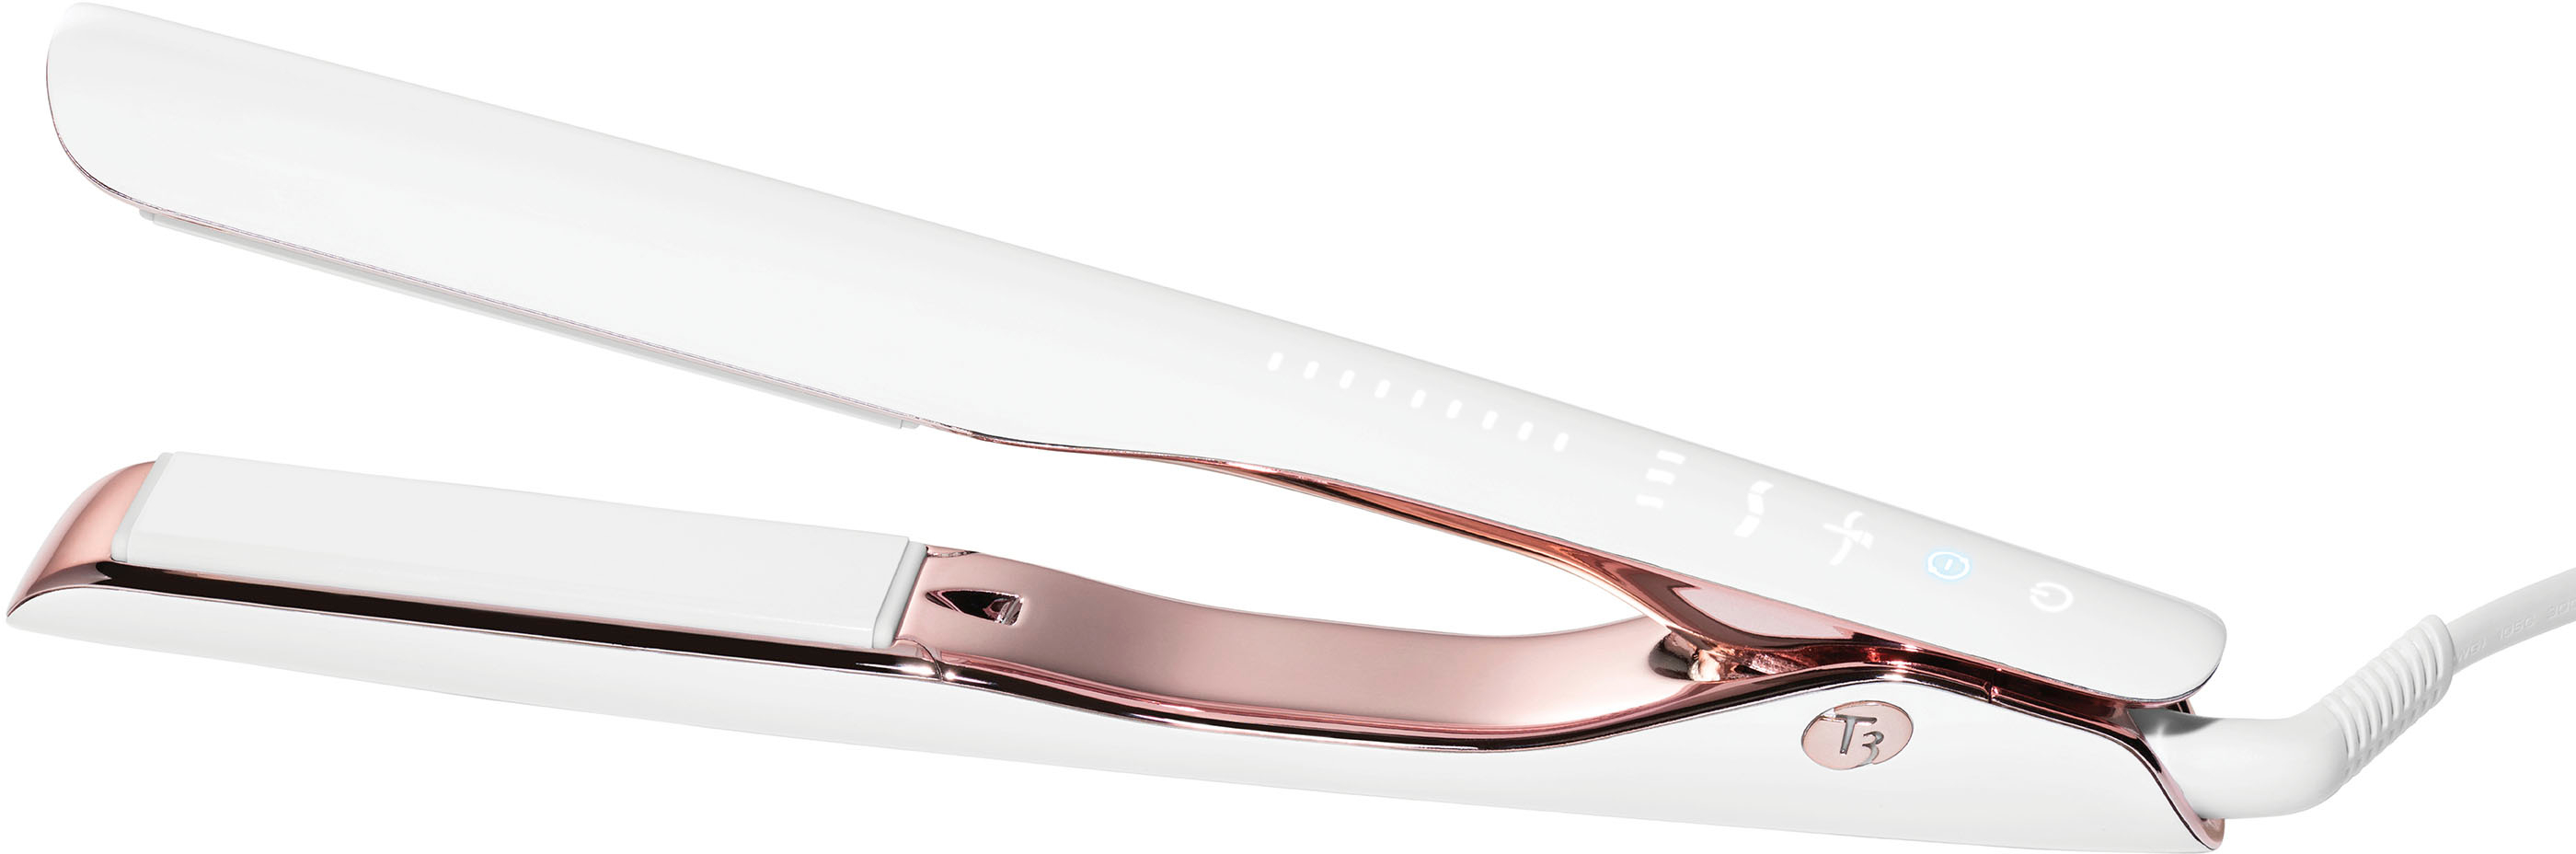 Angle View: T3 - Smooth ID 1” Smart Flat Iron with Touch Interface - White & Rose Gold